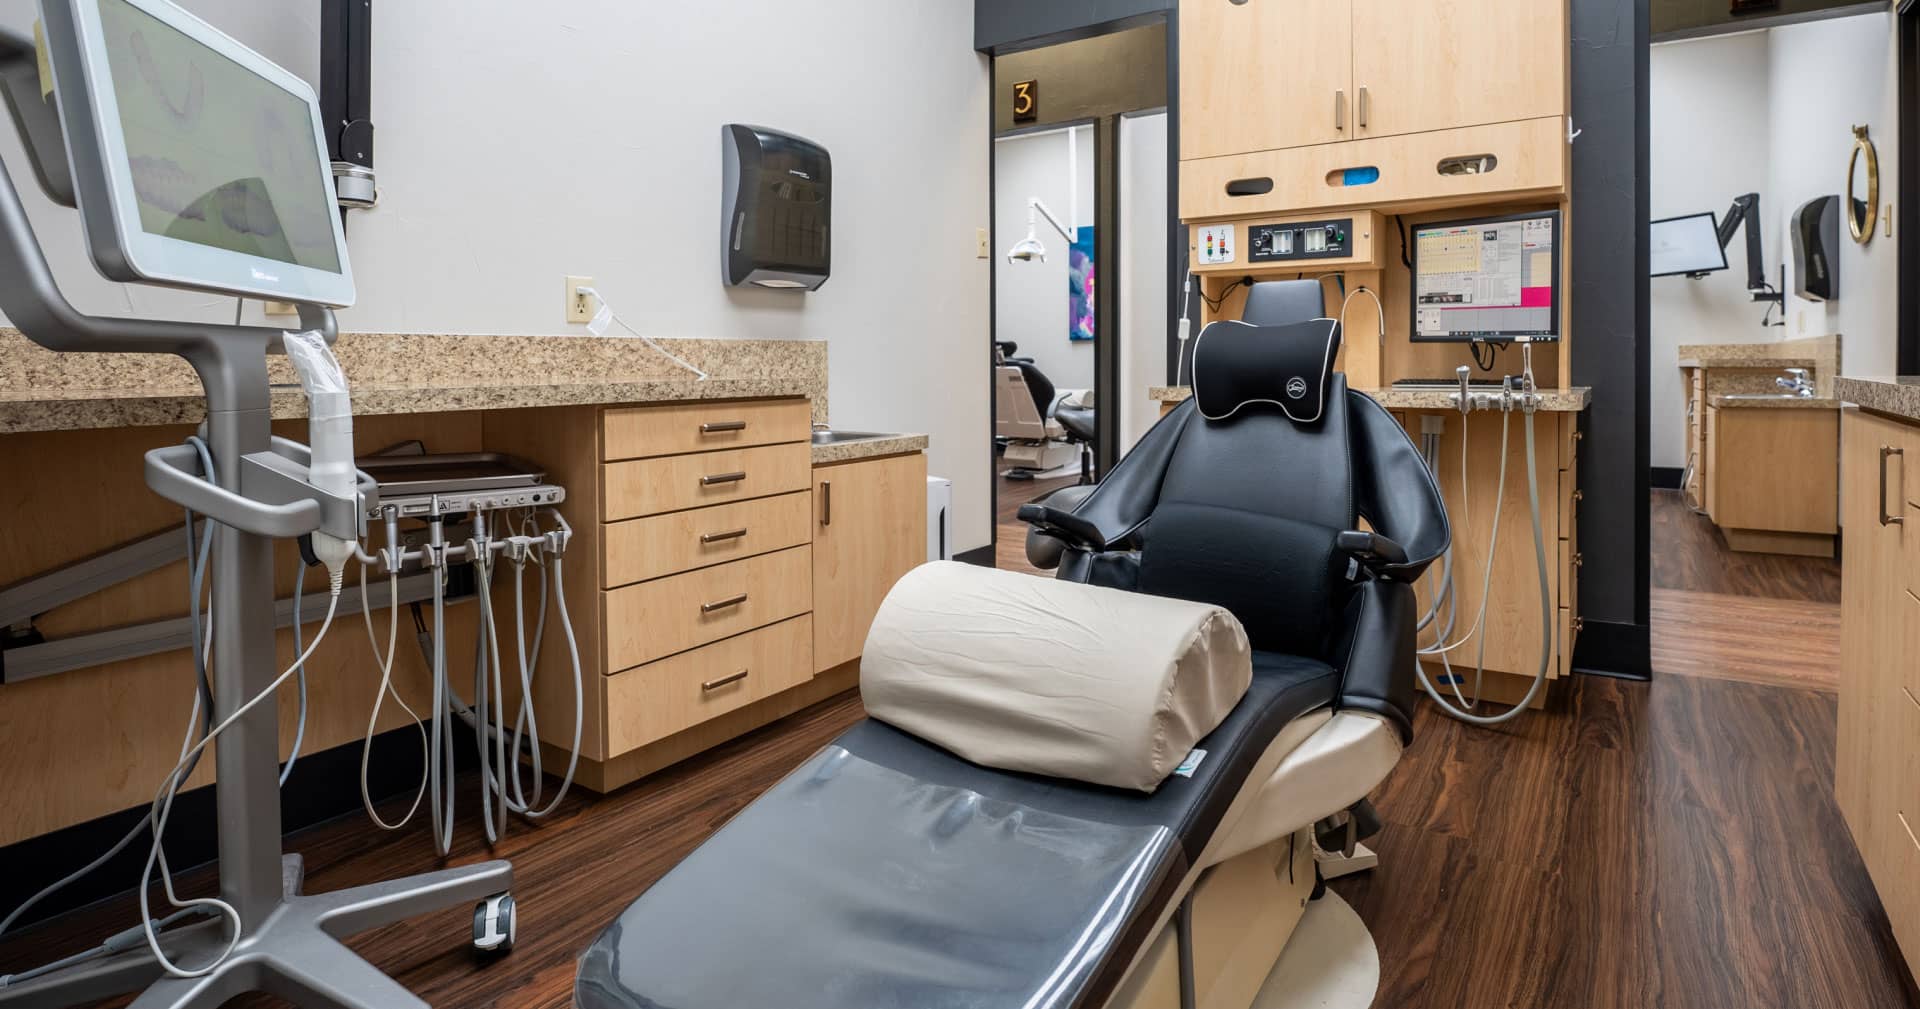 exam room with dental chair and equipment